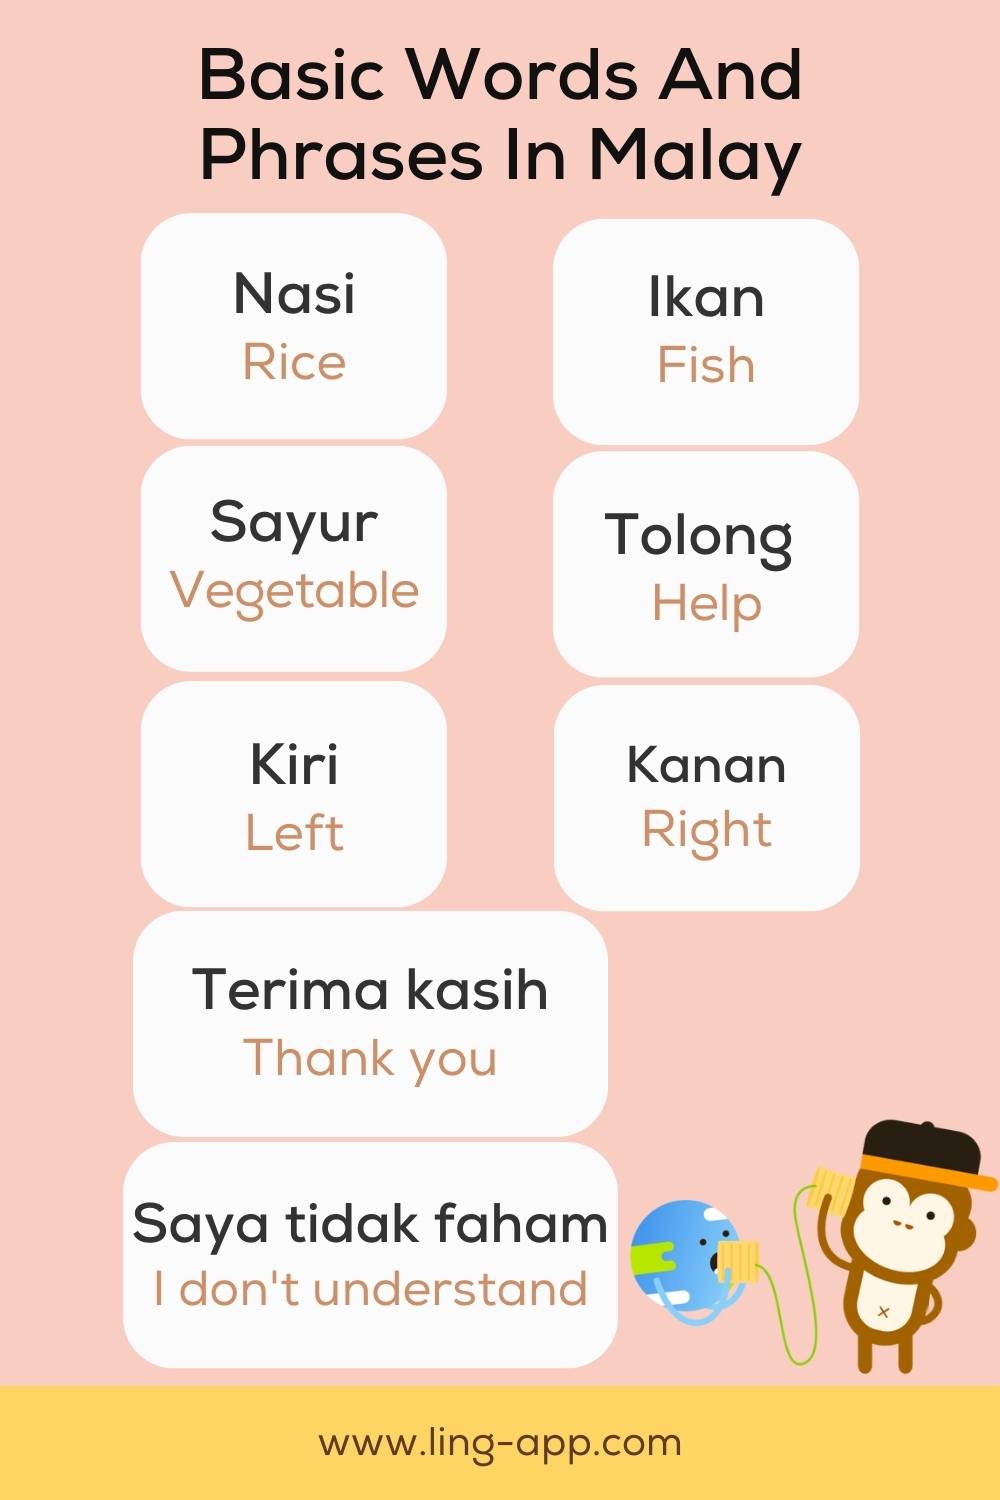 hypothesis meaning in malay language